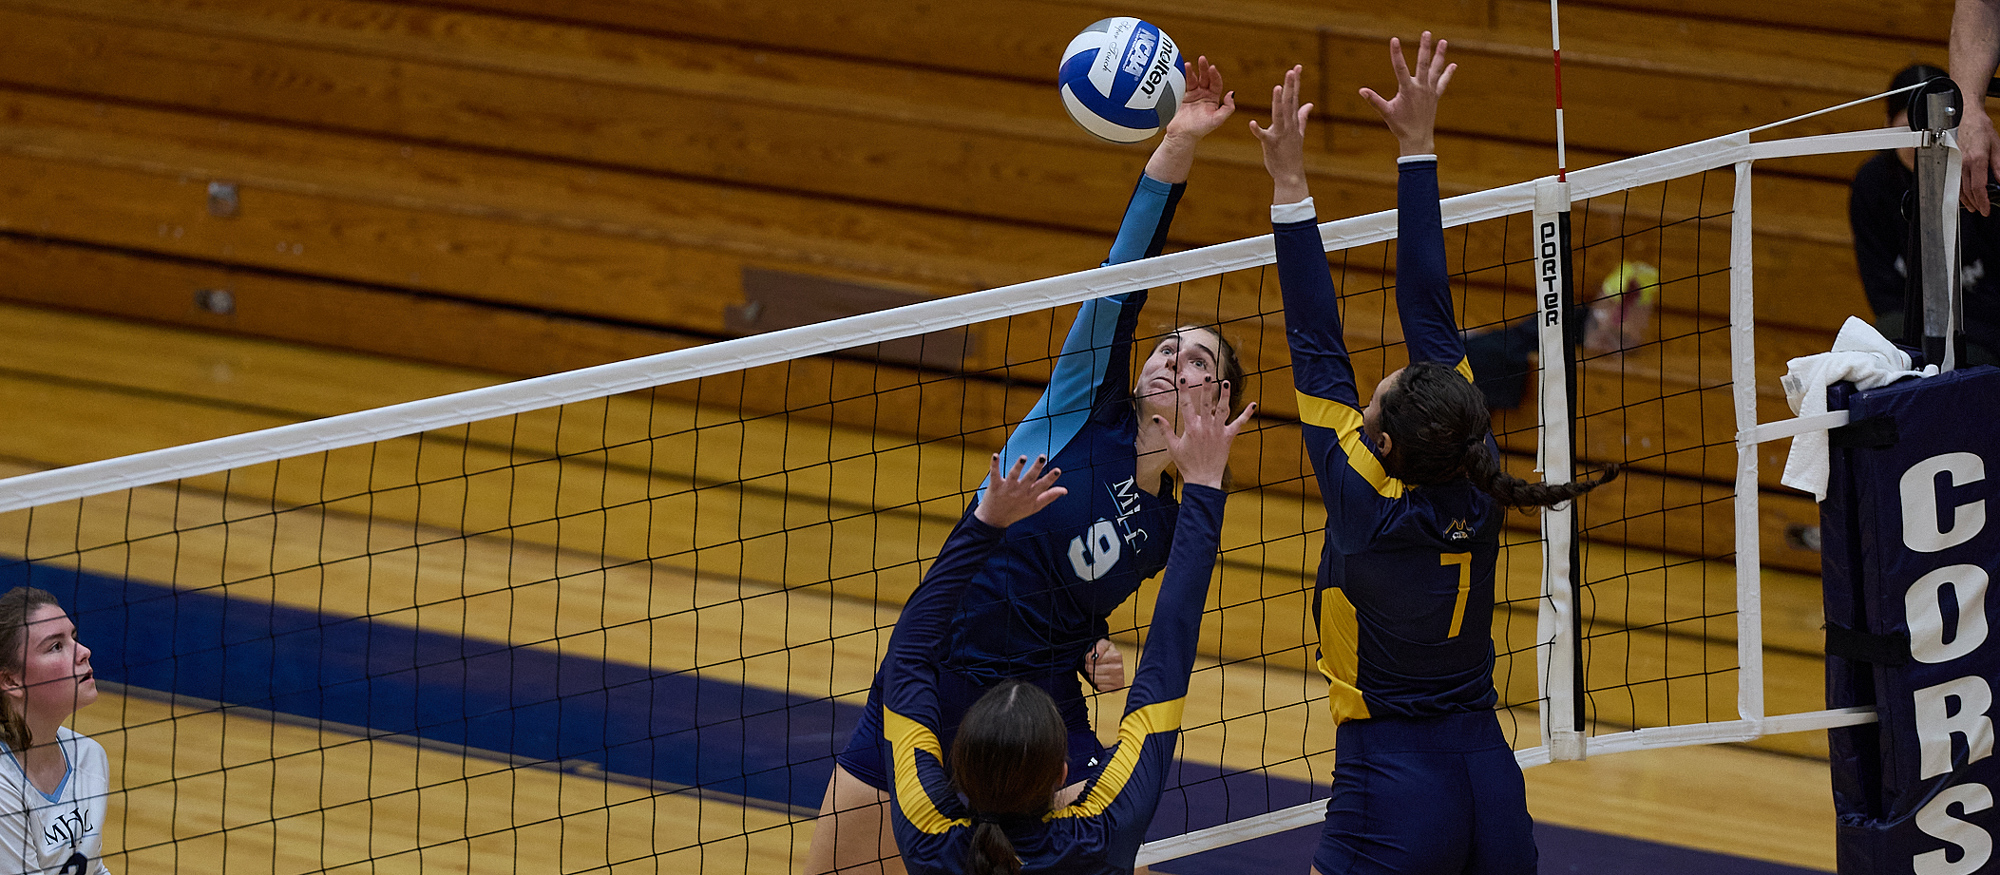 Lucie Berclaz had 11 kills and 14 digs in Mount Holyoke's 3-1 loss to Clark University on Oct. 31, 2023. (File photo courtesy of Micheal Ringor)